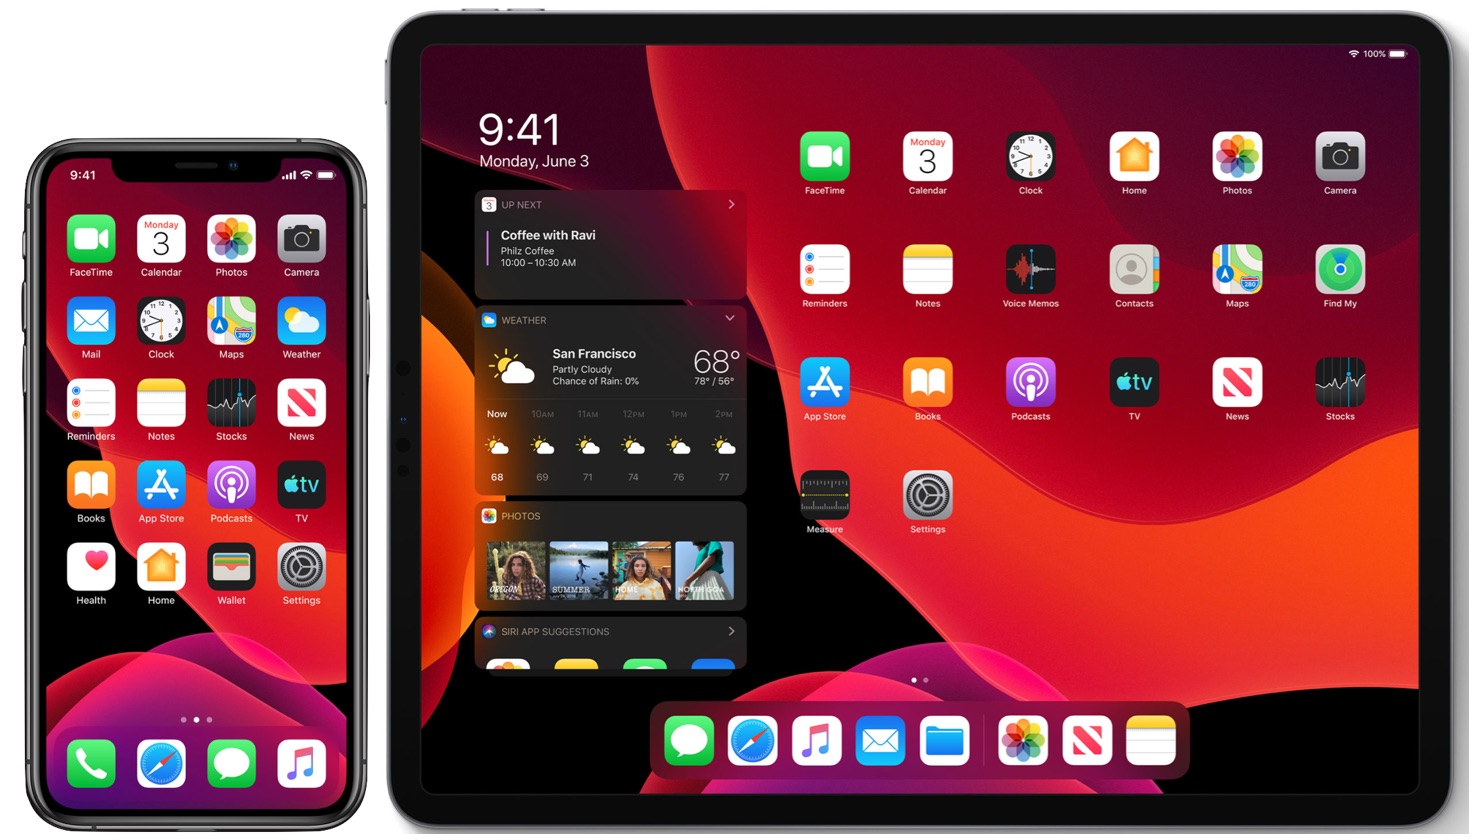 iOS 13.6.1 & iPadOS 13.6.1 Update Released, Fixes System Storage